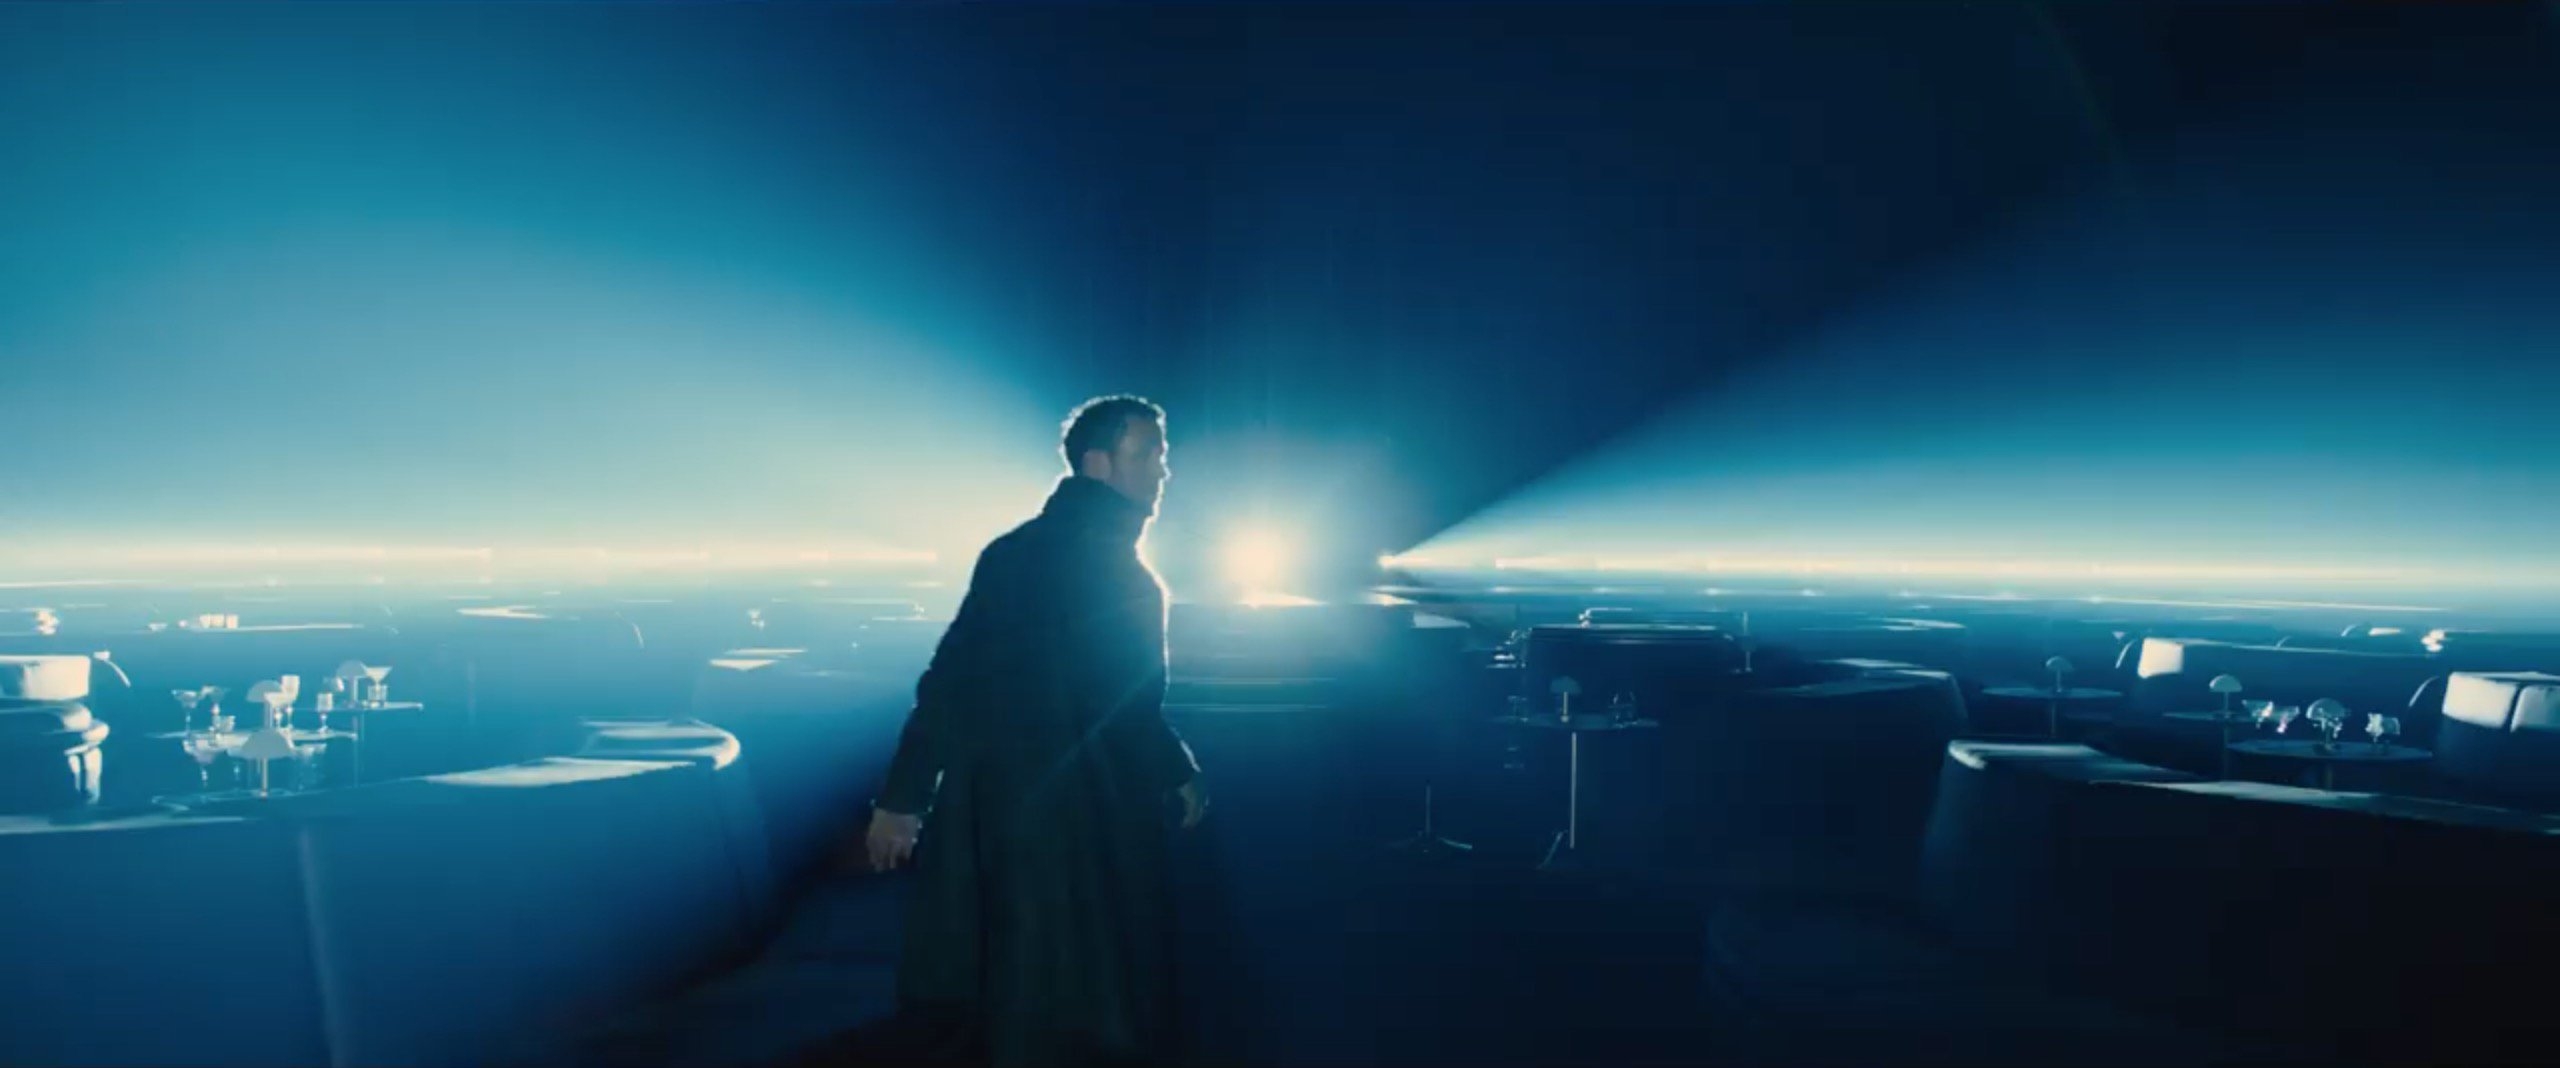 Review: Blade Runner 2049 - high-concept, blockbuster sci-fi' | Arts Cinema | Independent Cinema for Everyone located at Arts University Plymouth.